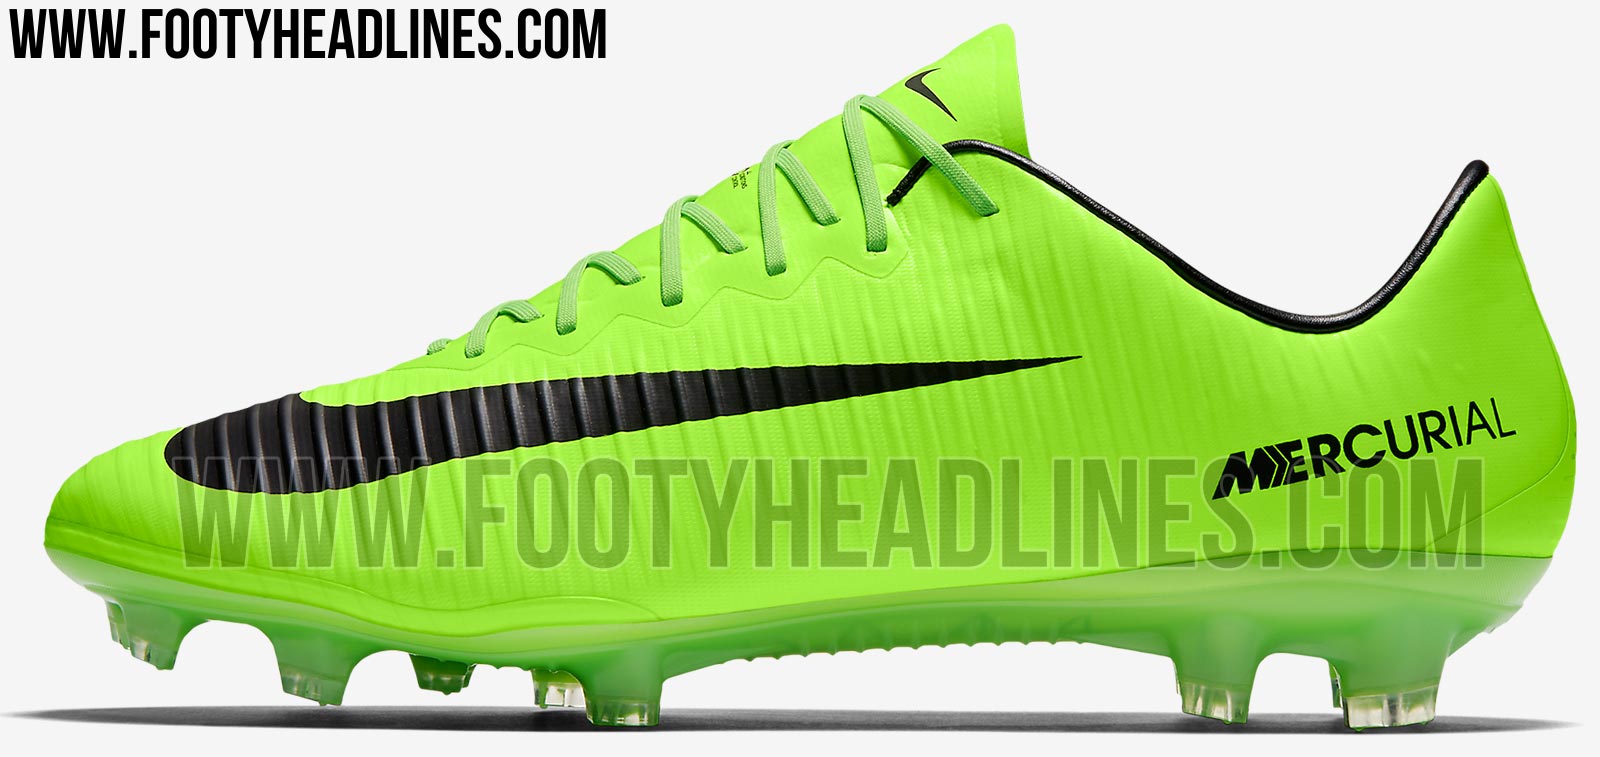 Electric Green Nike Mercurial Vapor XI Radiation Flare Boots Revealed - Footy Headlines